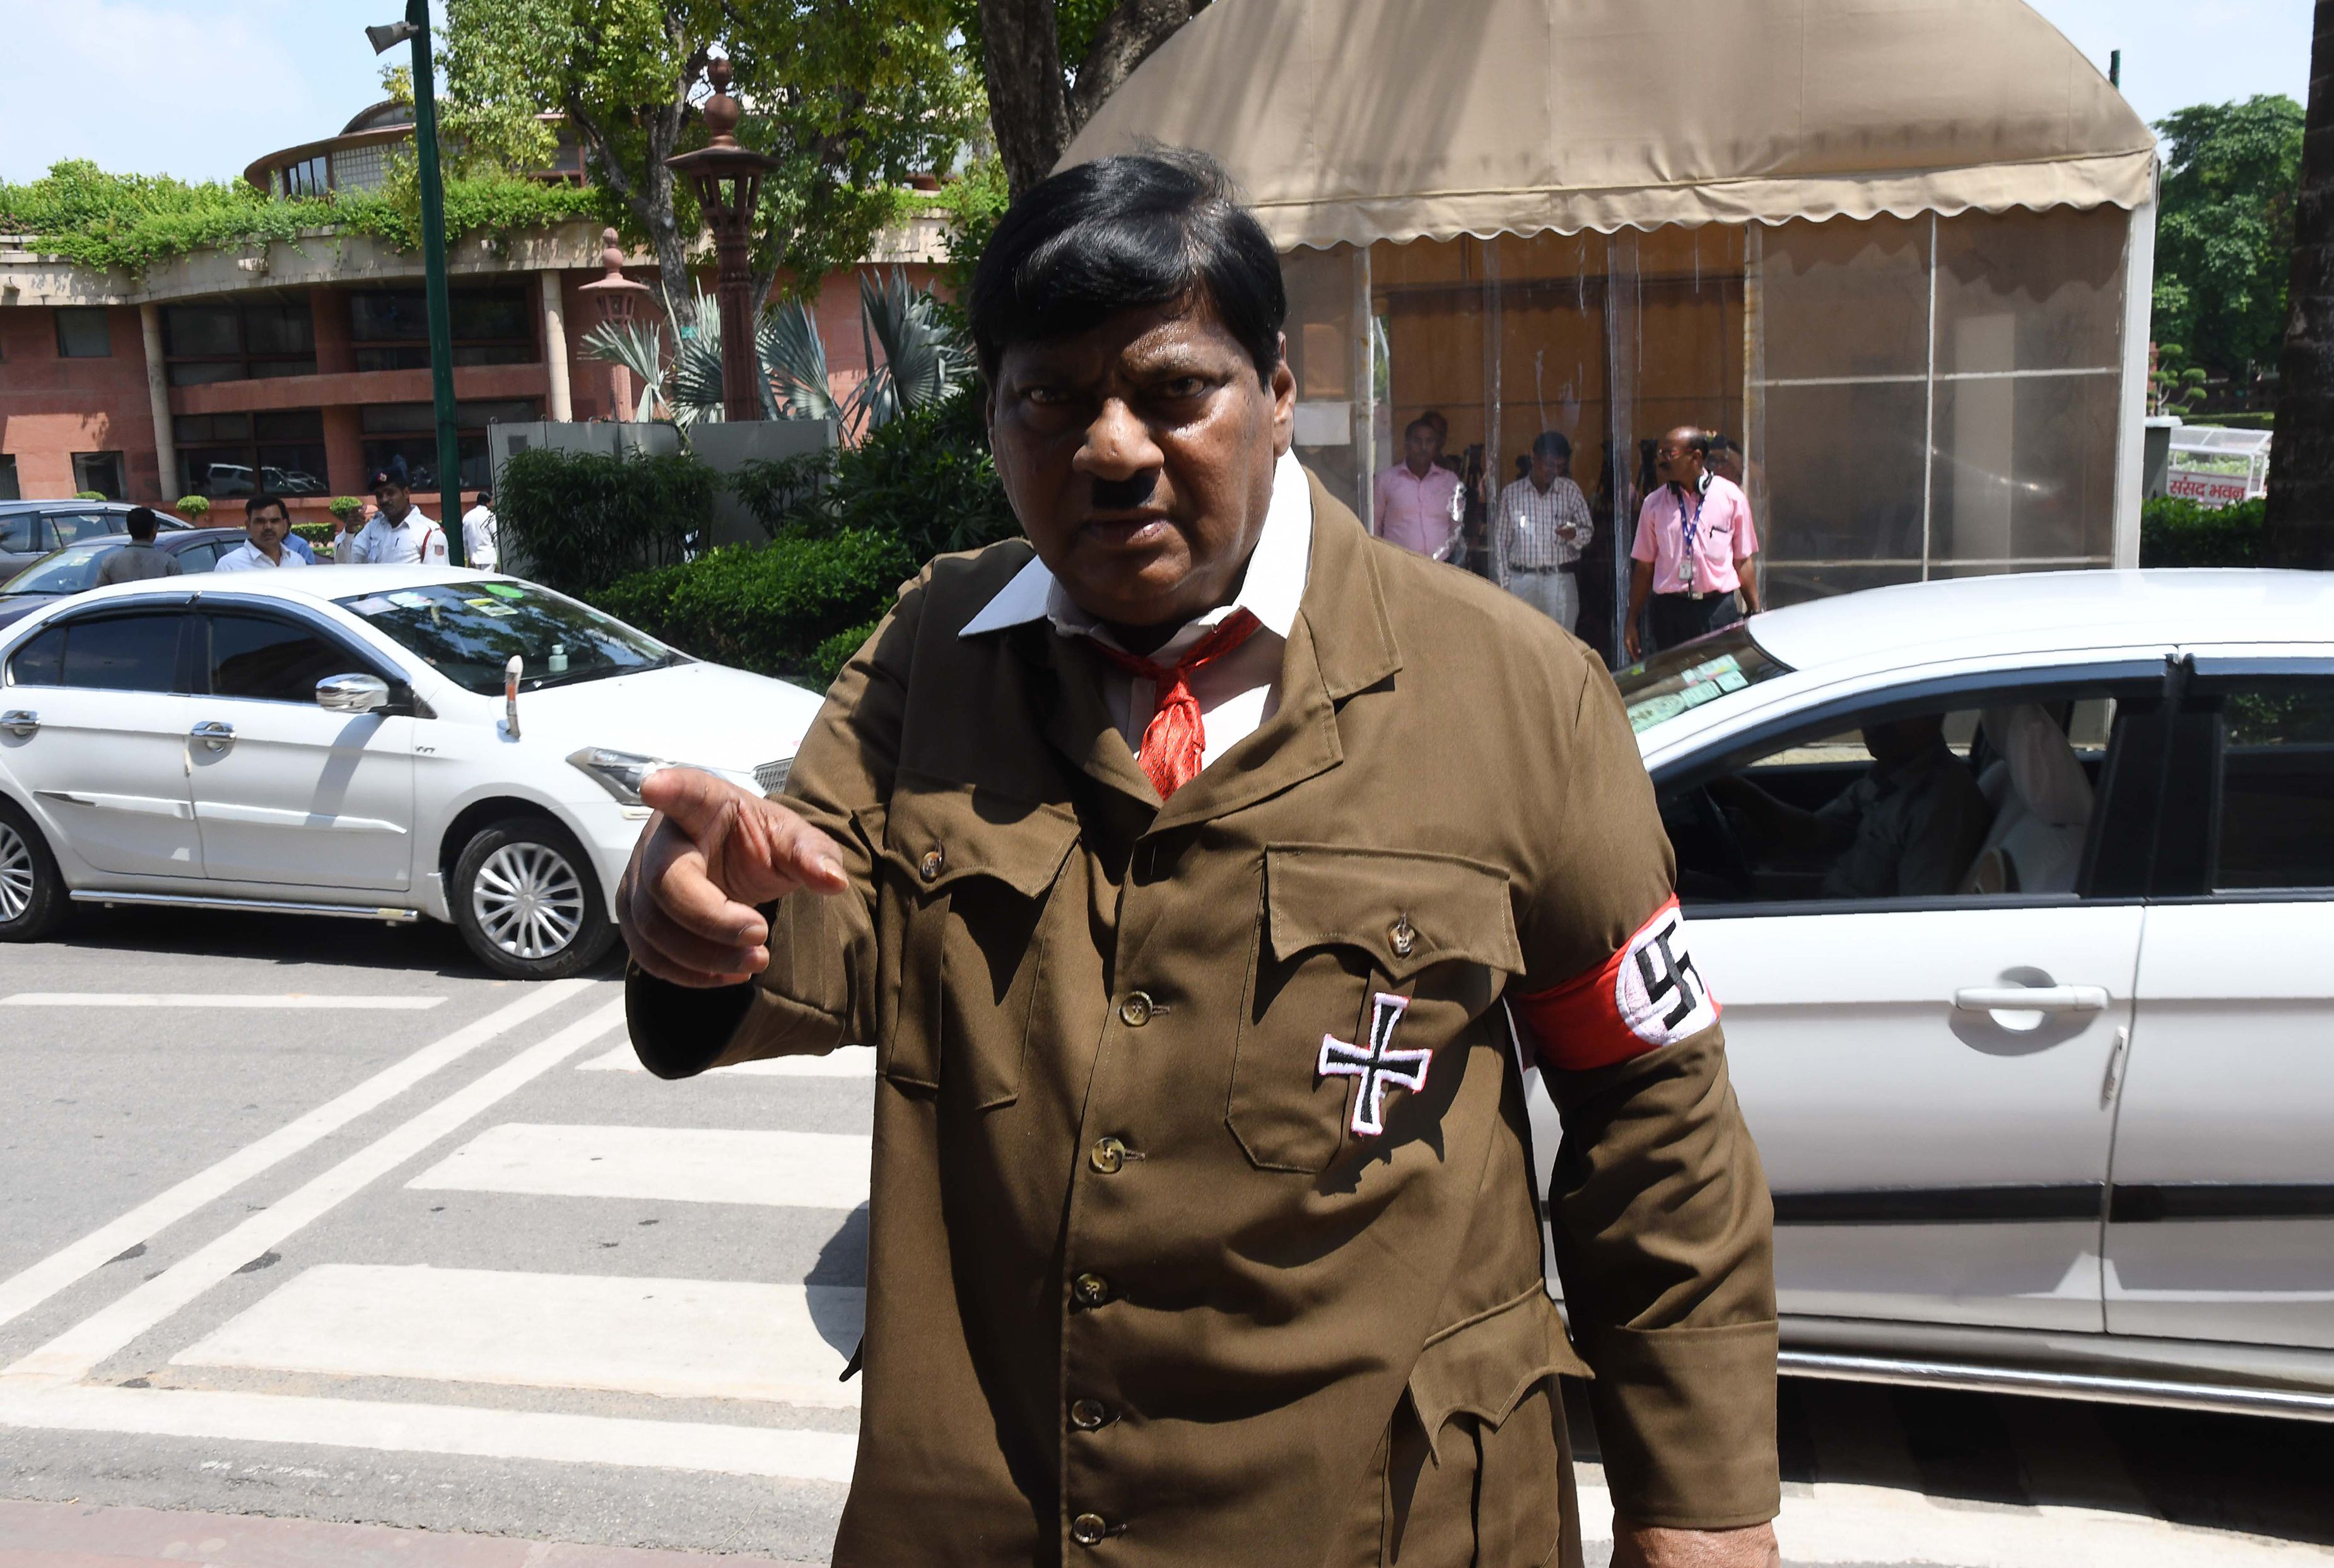 Indian film actor turned politician Naramalli Sivaprasad, arrives at parliament dressed as Adolf Hitler to press for government funding for his home state of Andhra Pradesh, in New Delhi on A